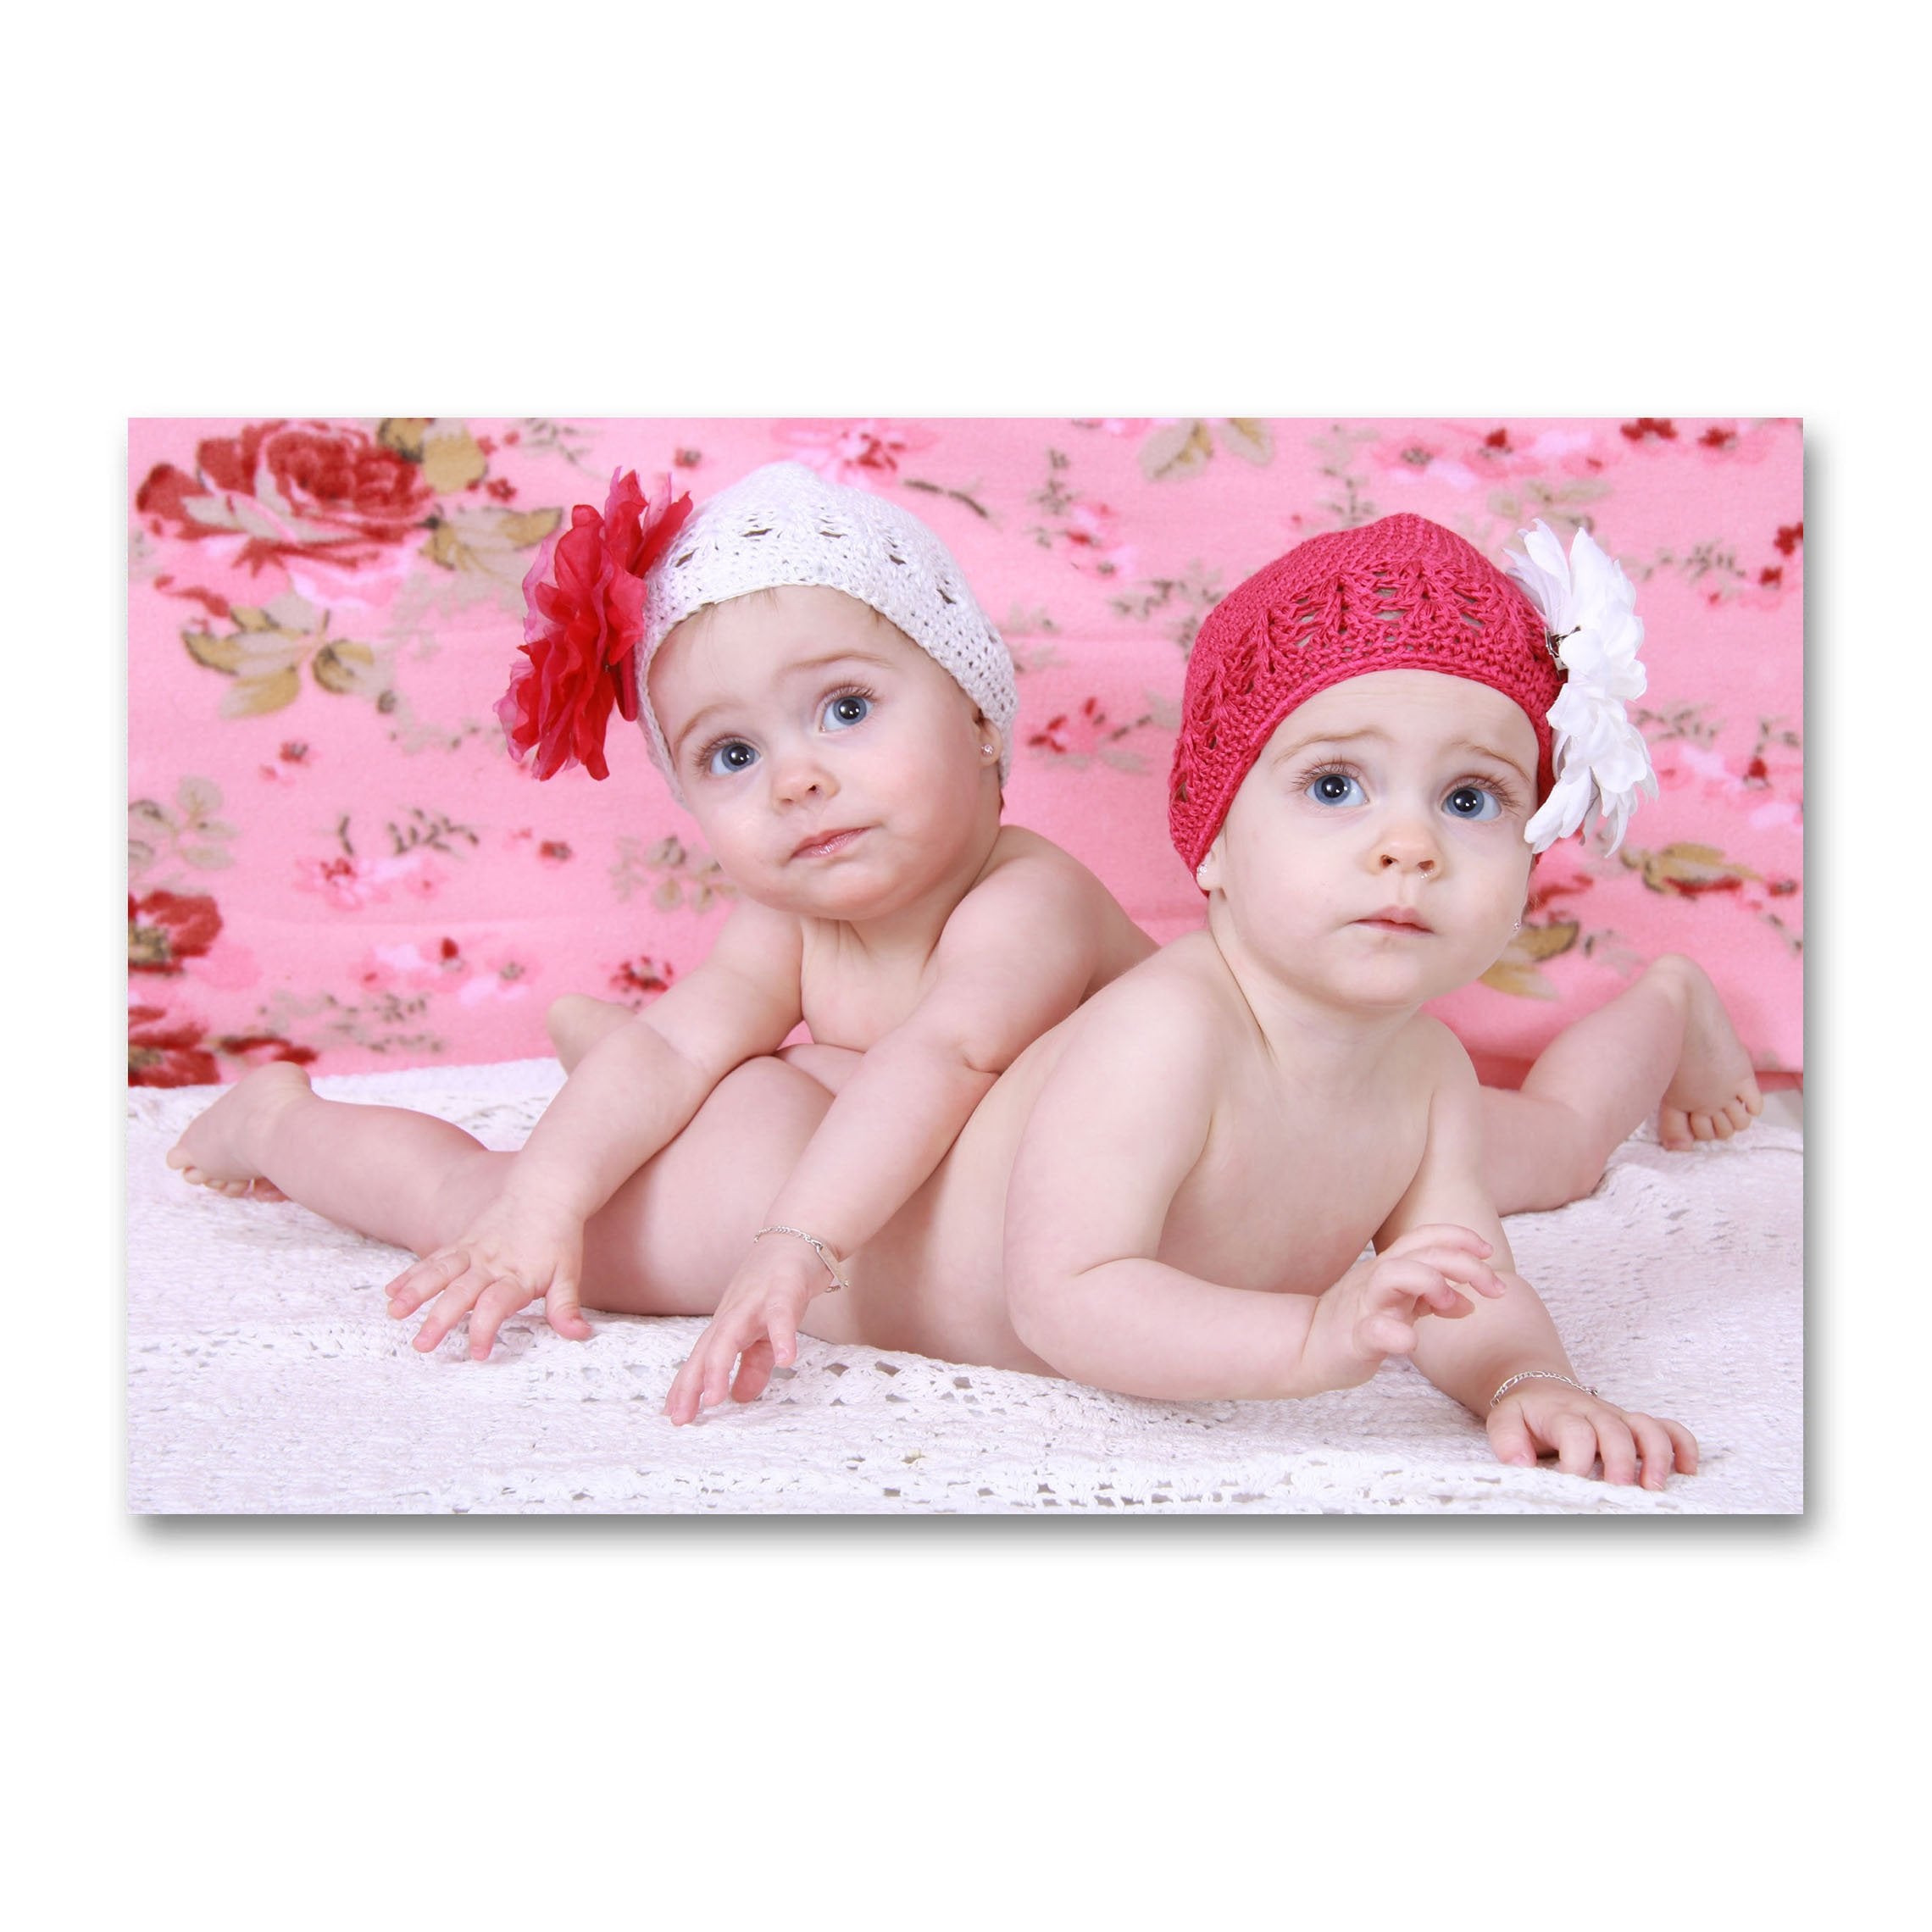 White & Pink Cap In A Babies